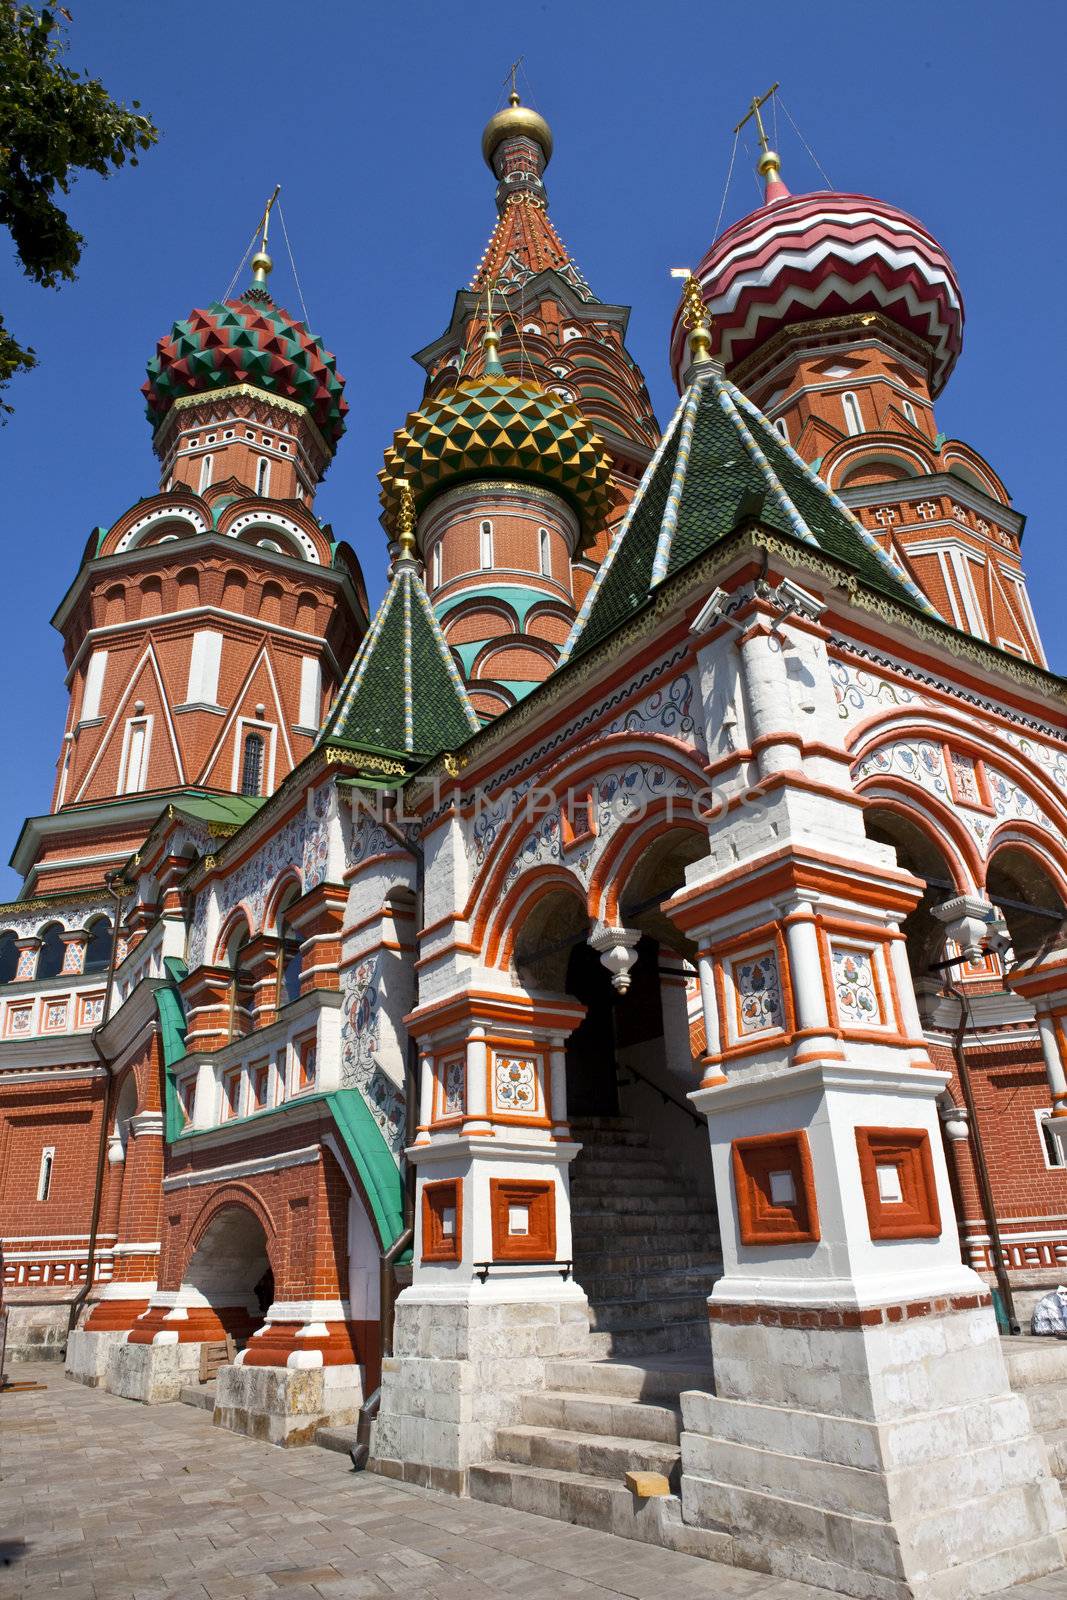 St Basil's Cathderal on Red Square, Moscow.